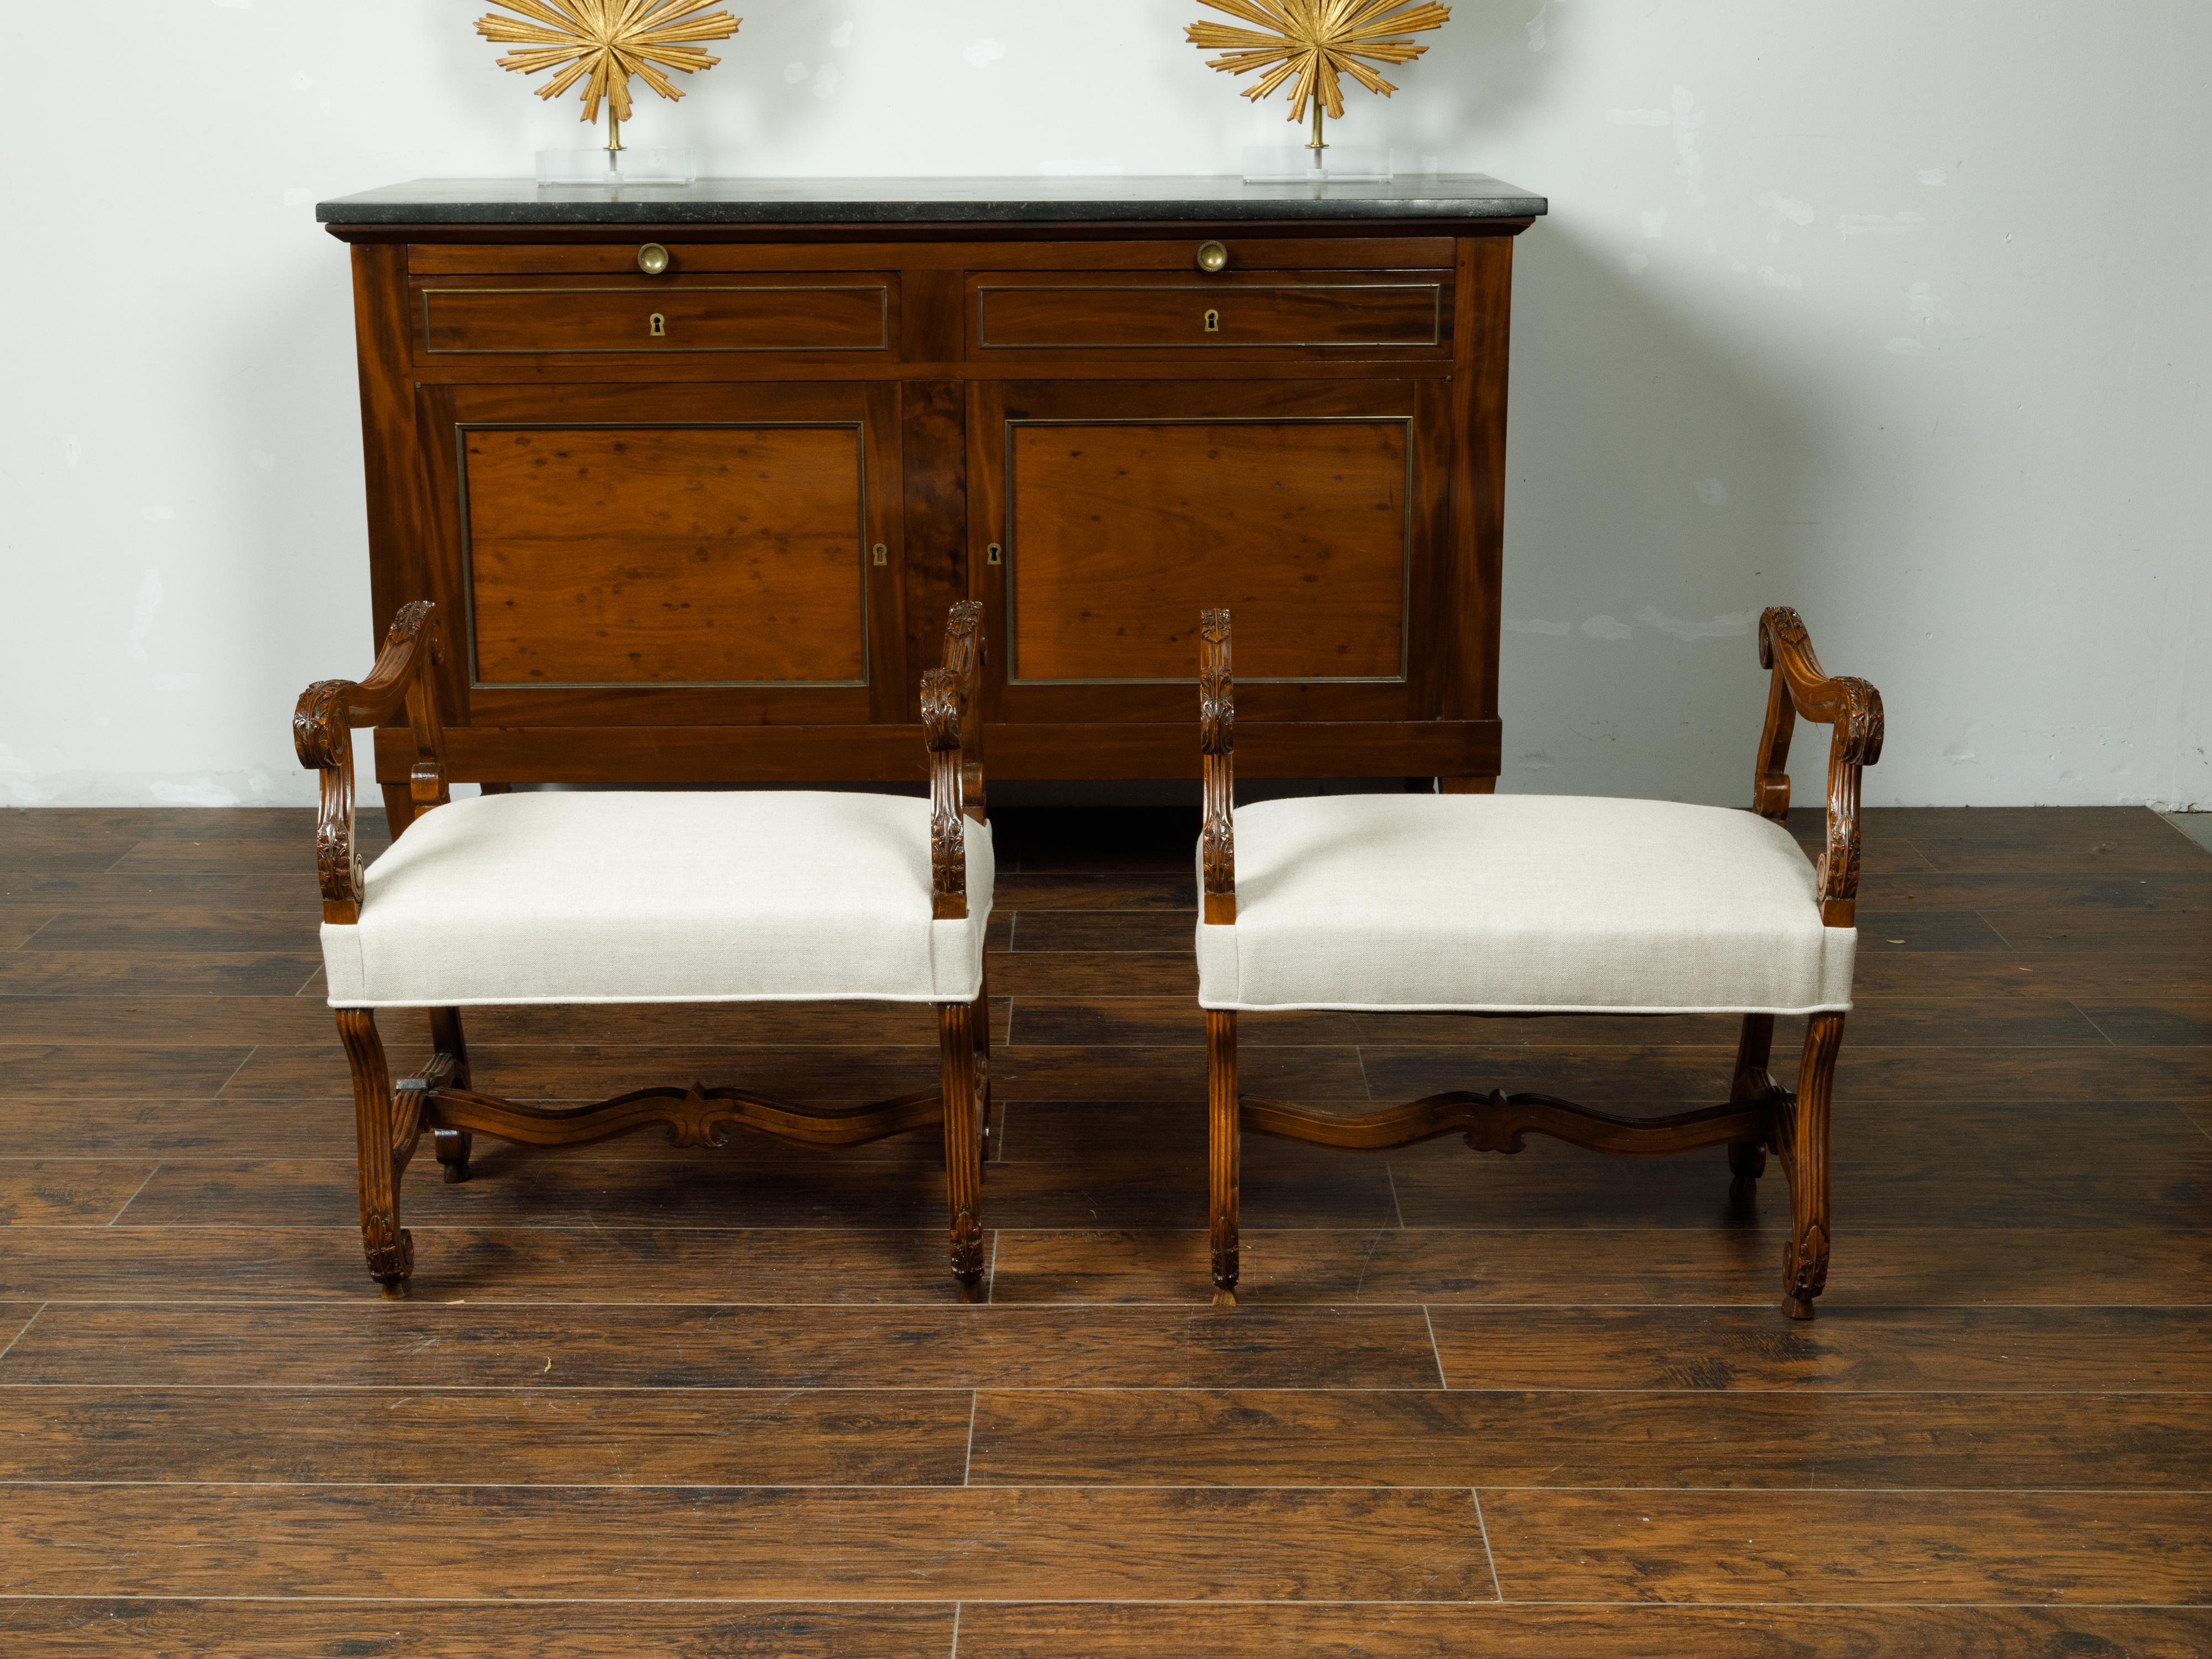 A pair of French Napoléon III walnut stools from the late 19th century, with scrolling accents and new upholstery. Created in France at the end of Emperor Napoléon III's reign, each of this pair of stools features a rectangular top reupholstered